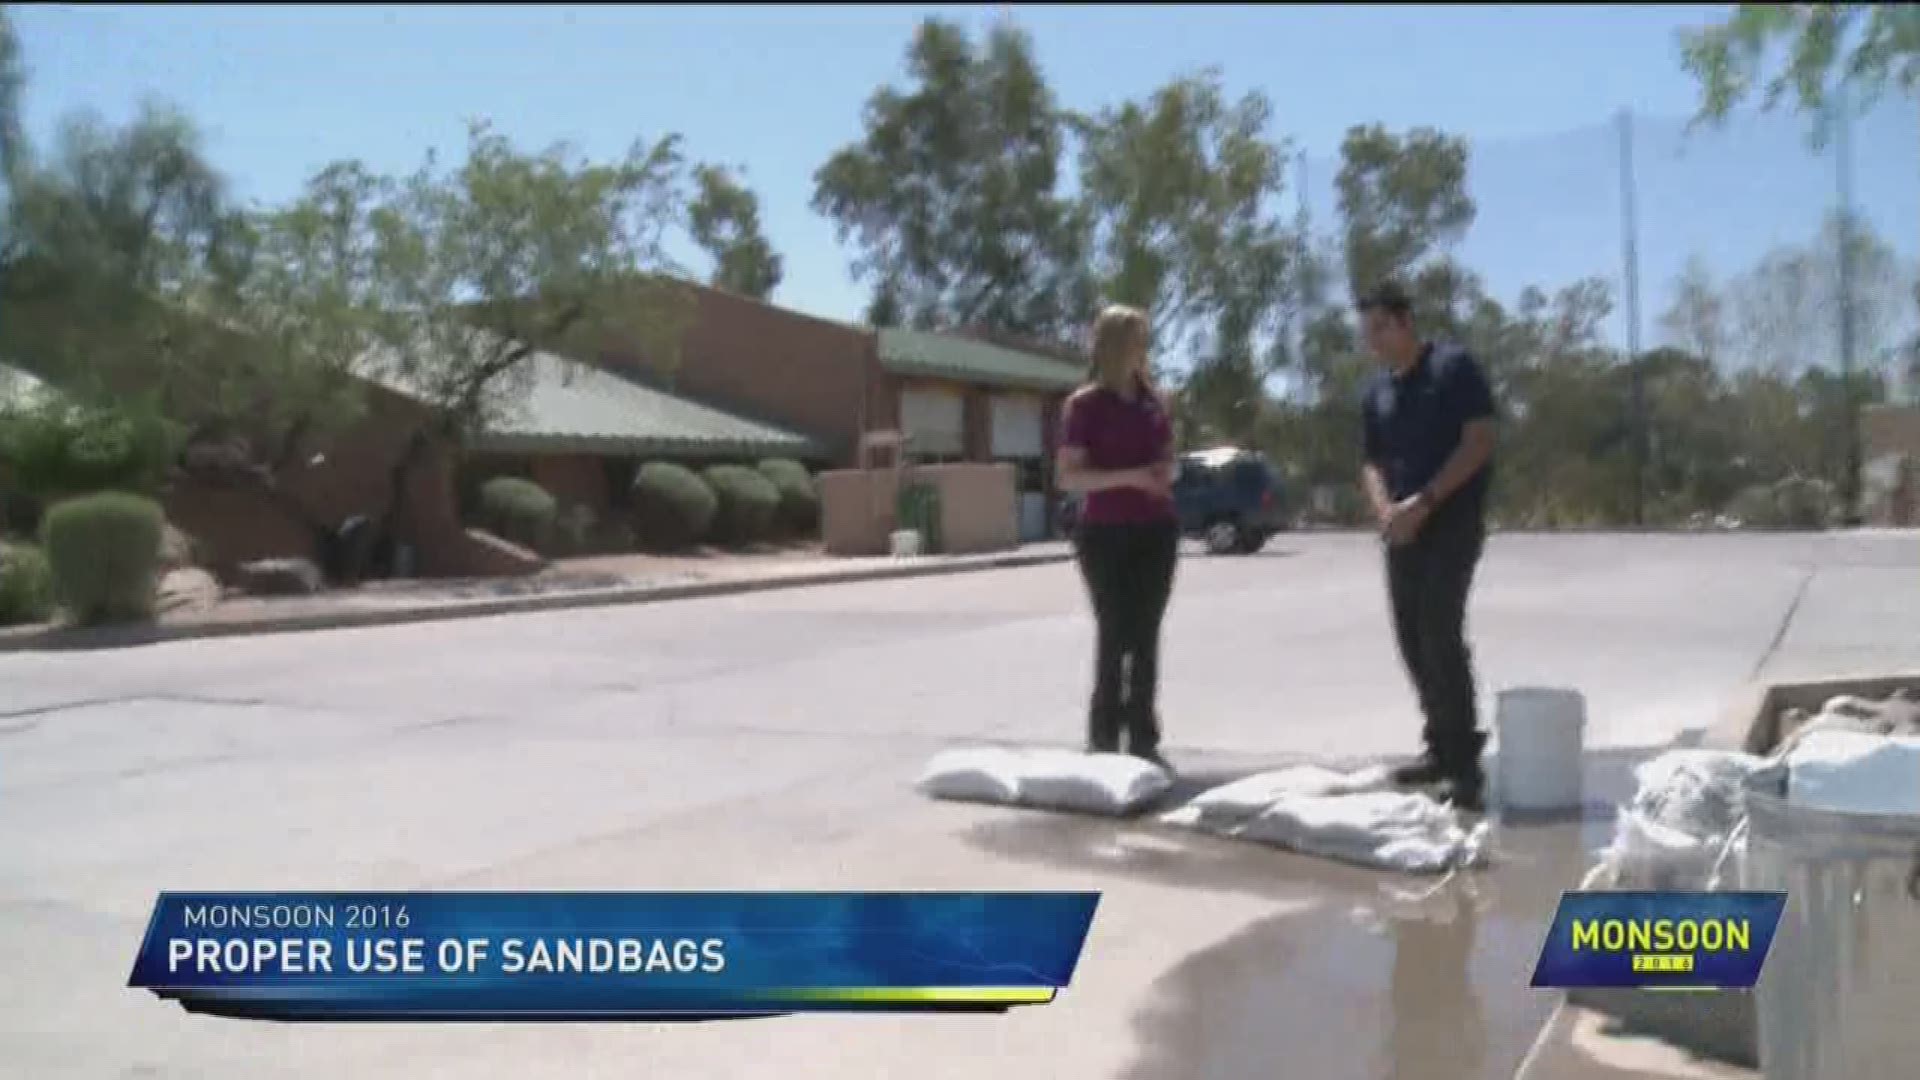 The do's and don'ts of sandbags for monsoon